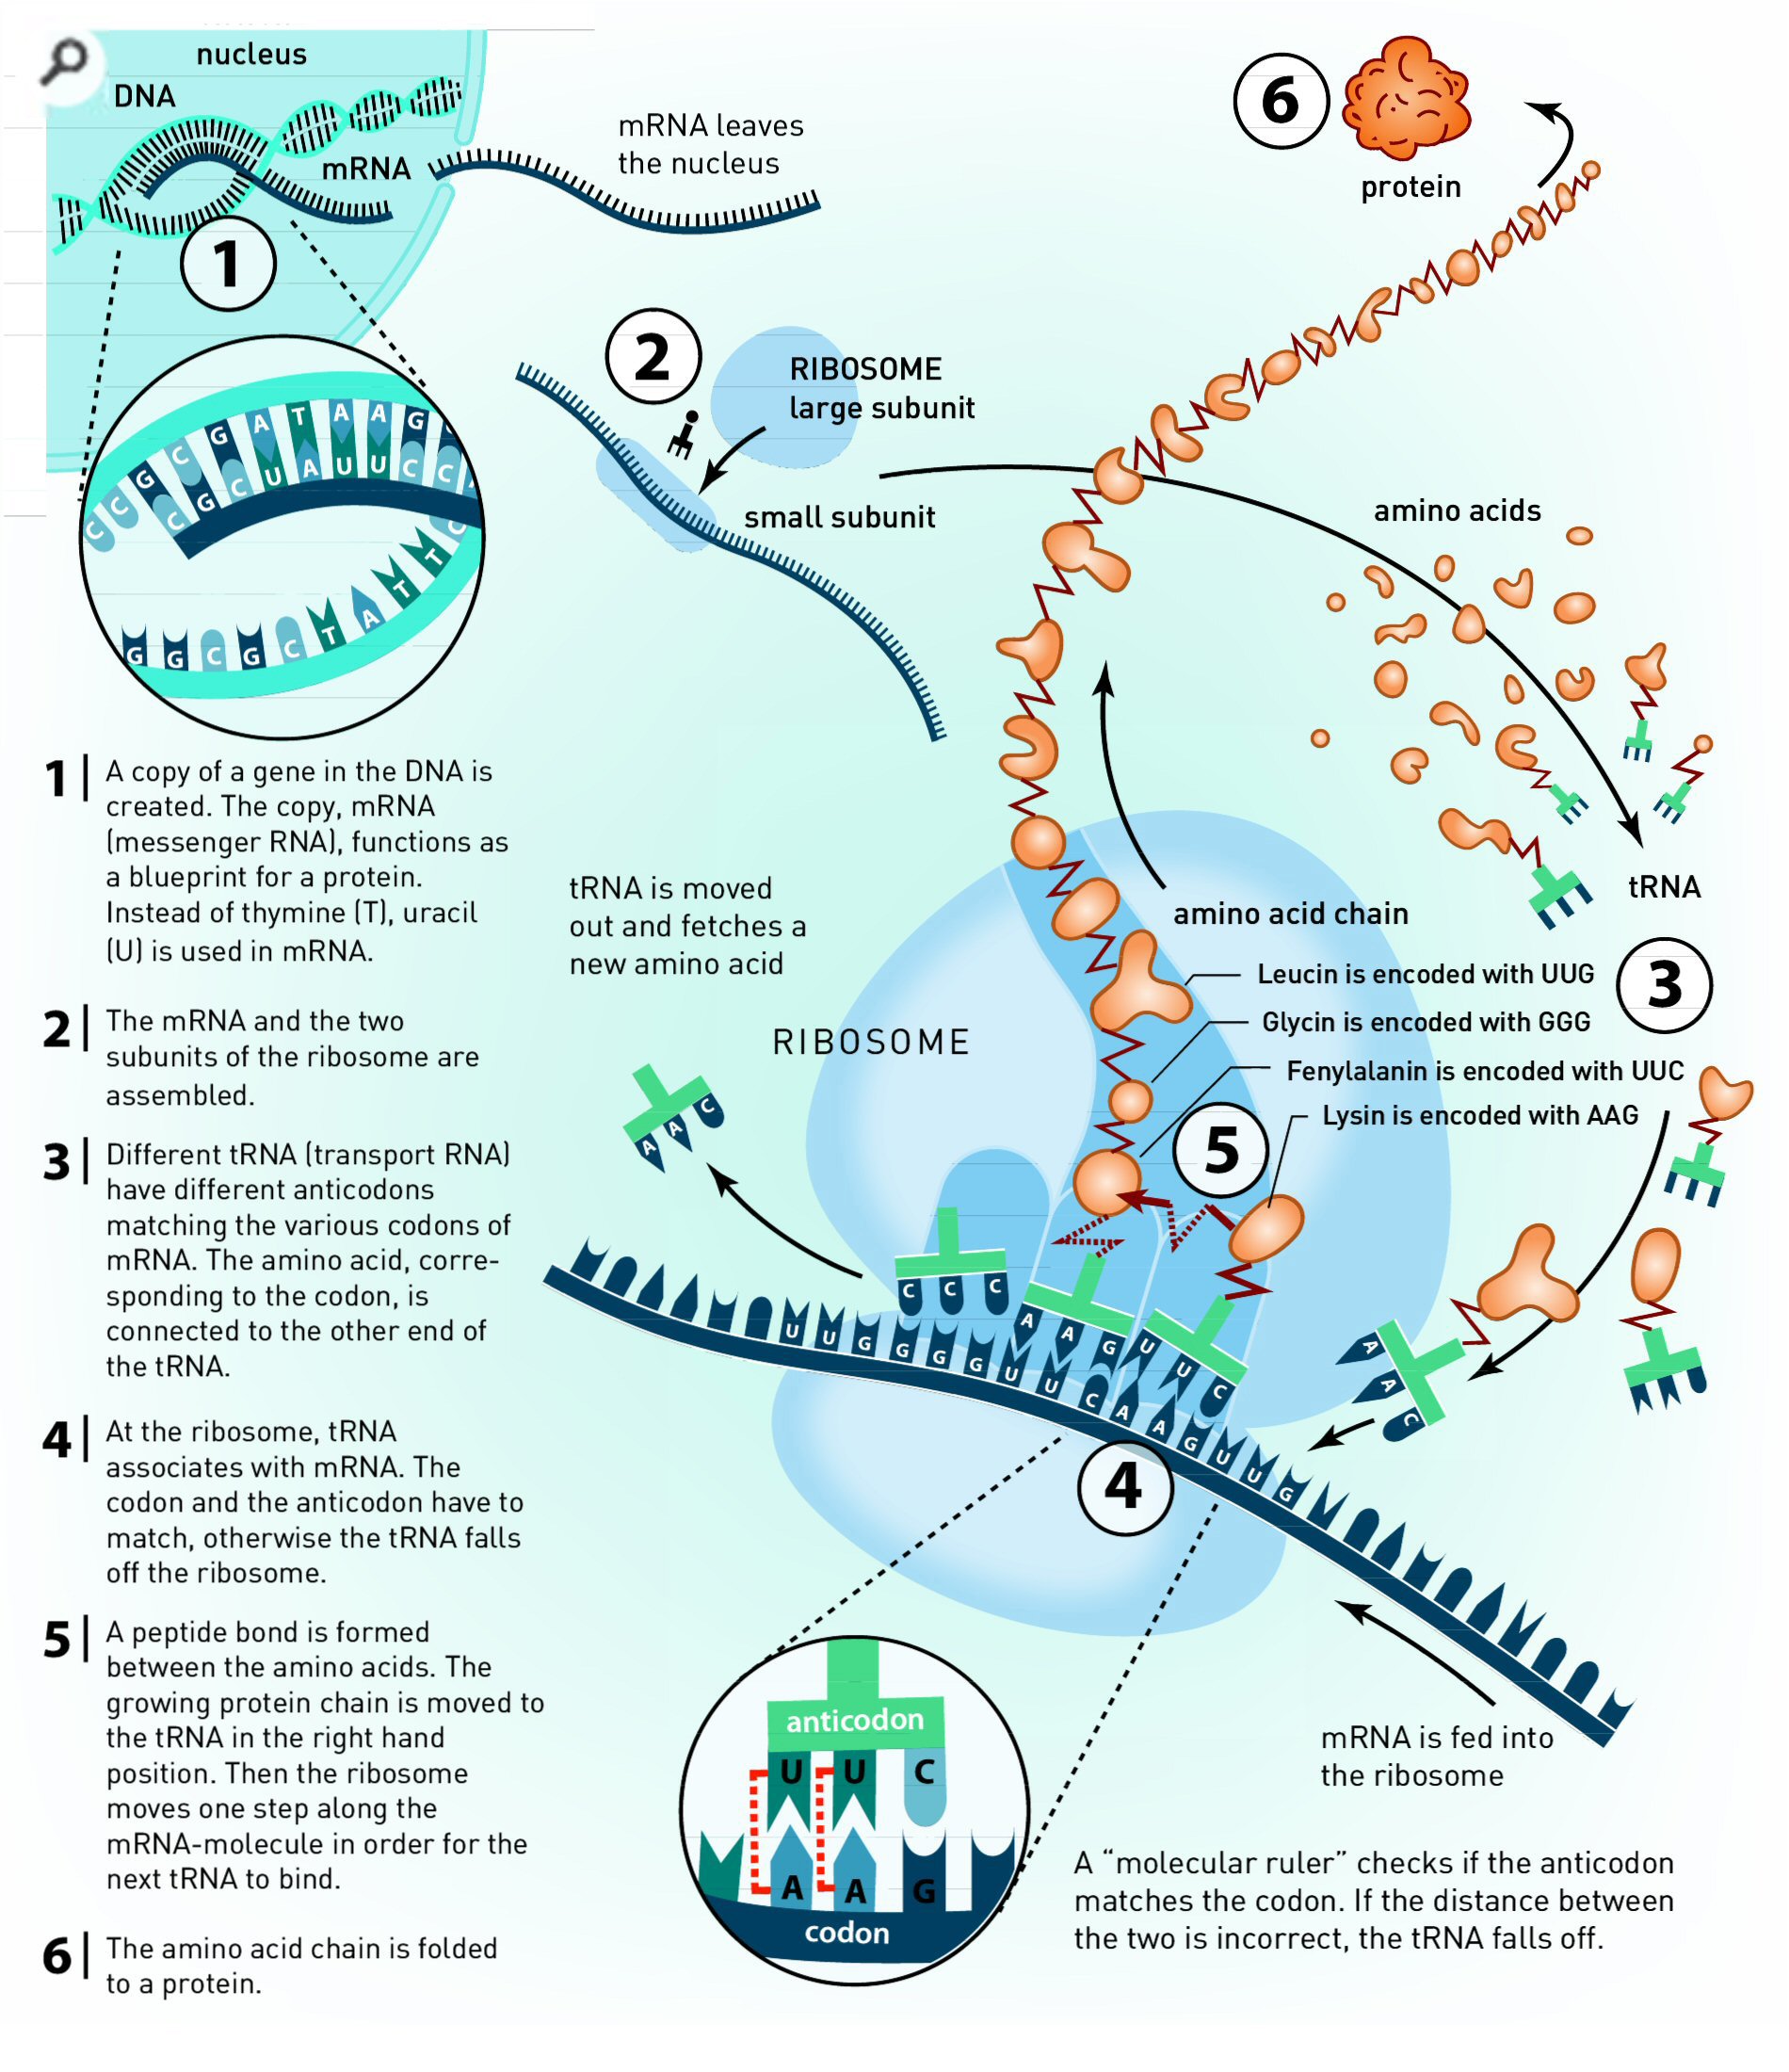 RNA to Protein. Source: http://www.infohow.org/wp-content/uploads/2012/11/DNA.jpg